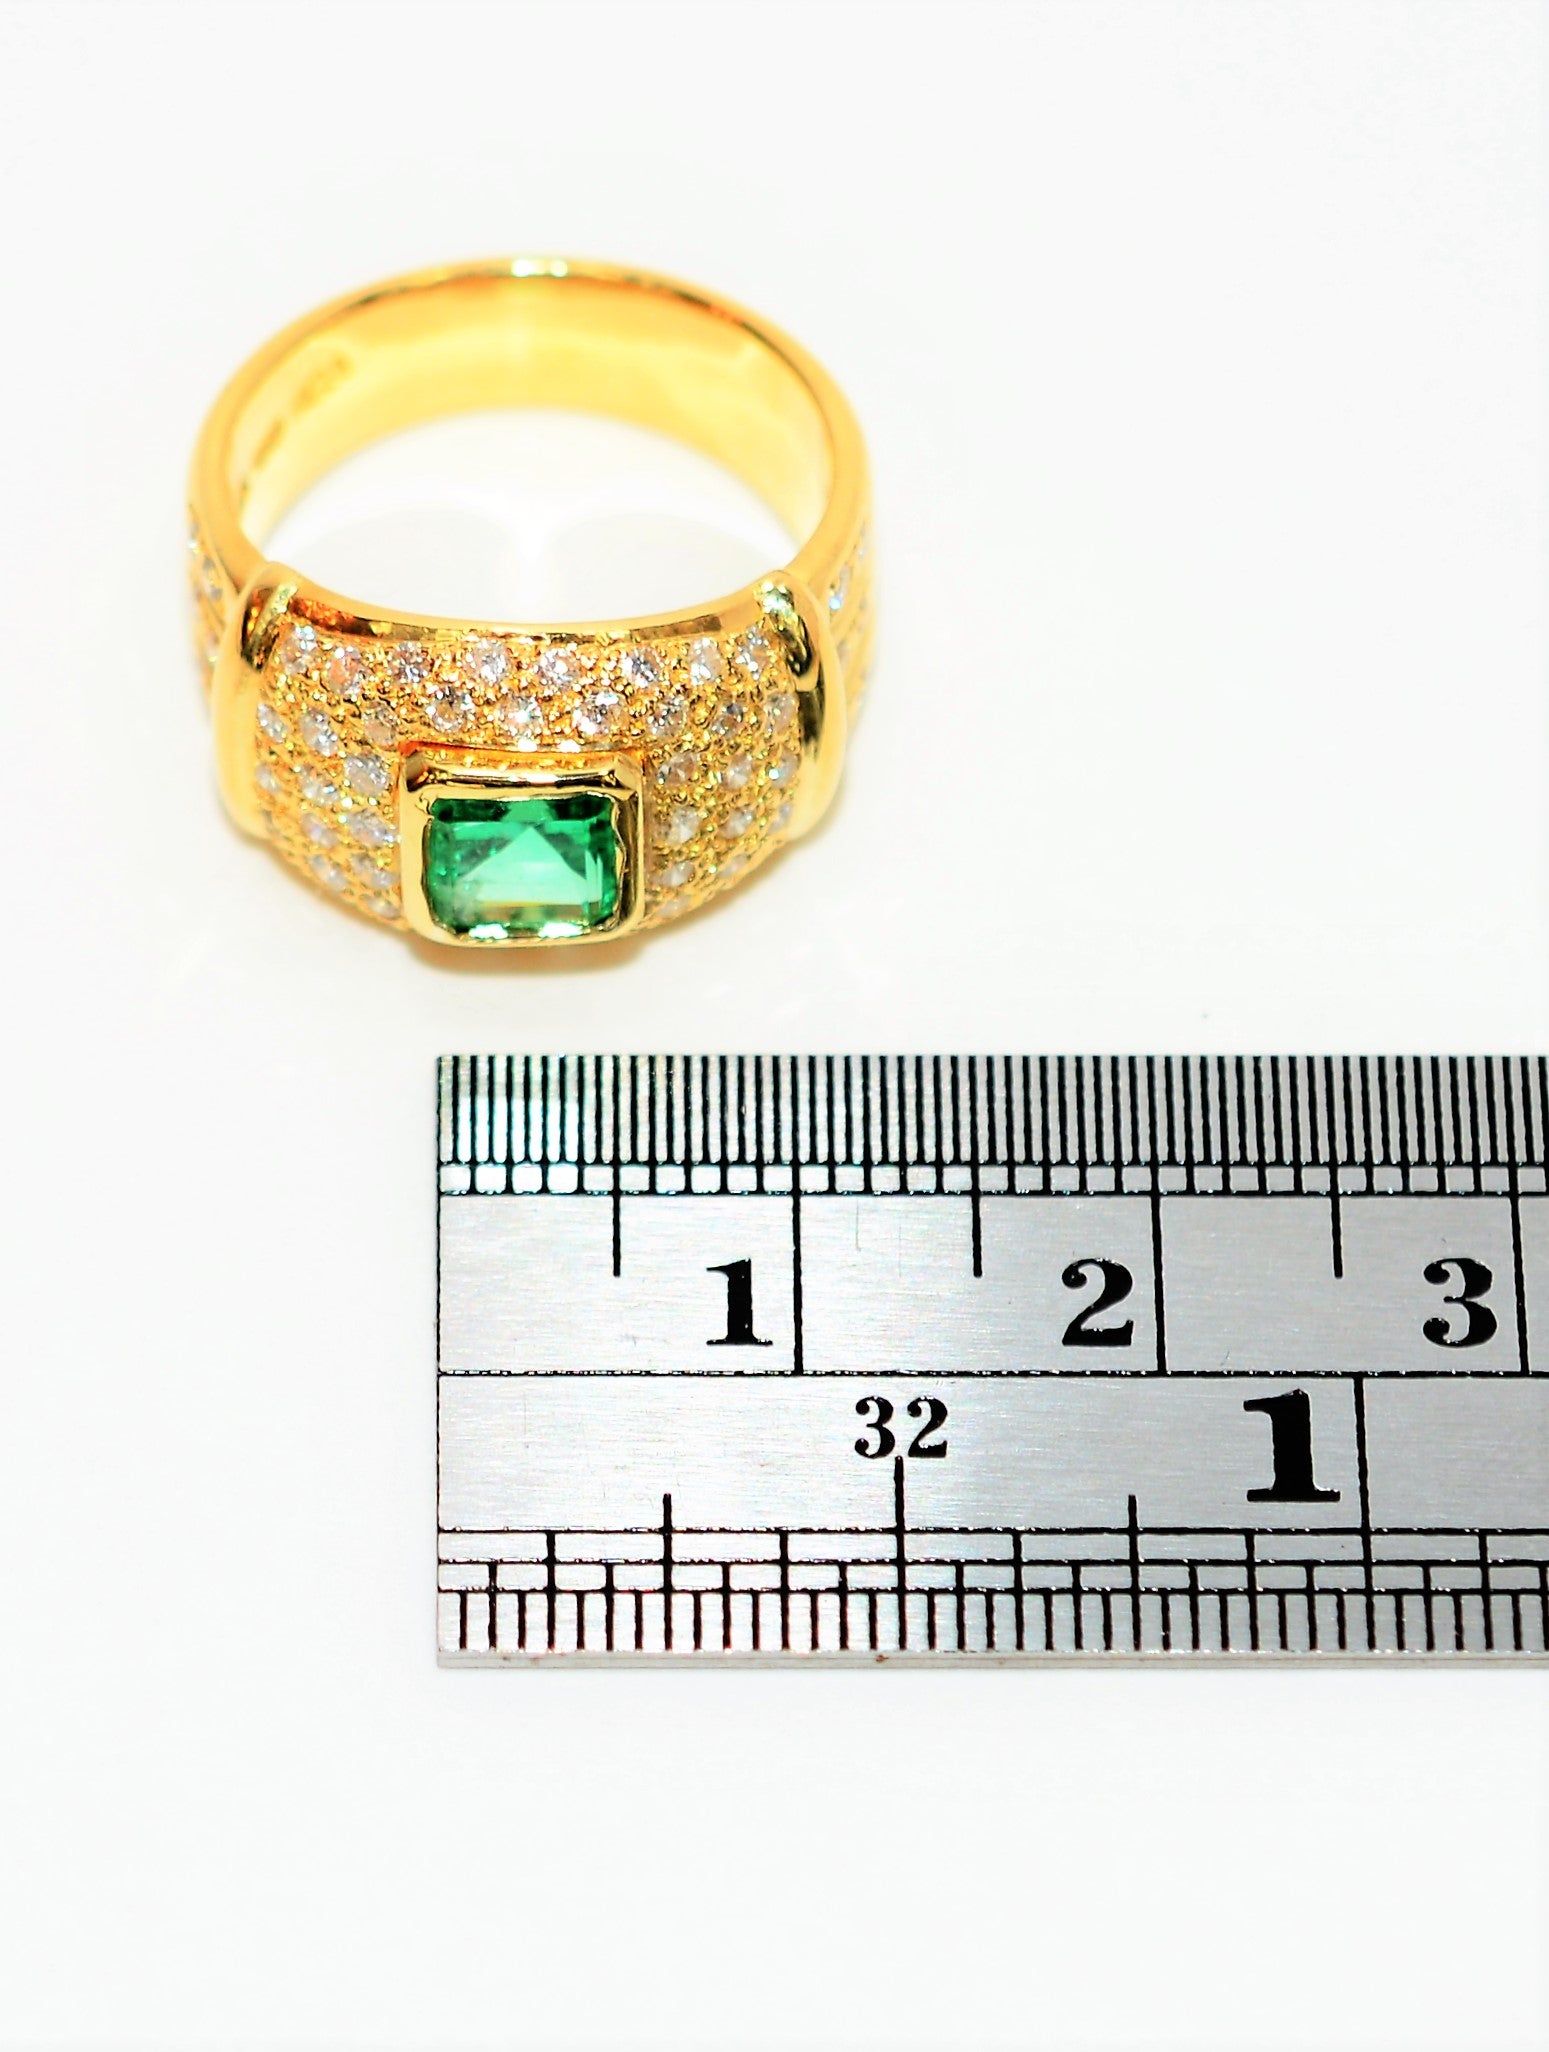 Natural Colombian Emerald & Diamond Ring 18K Solid Gold 1.21tcw Gemstone Ring Estate Ring May Birthstone Ring Fine Jewelry Vintage Jewellery